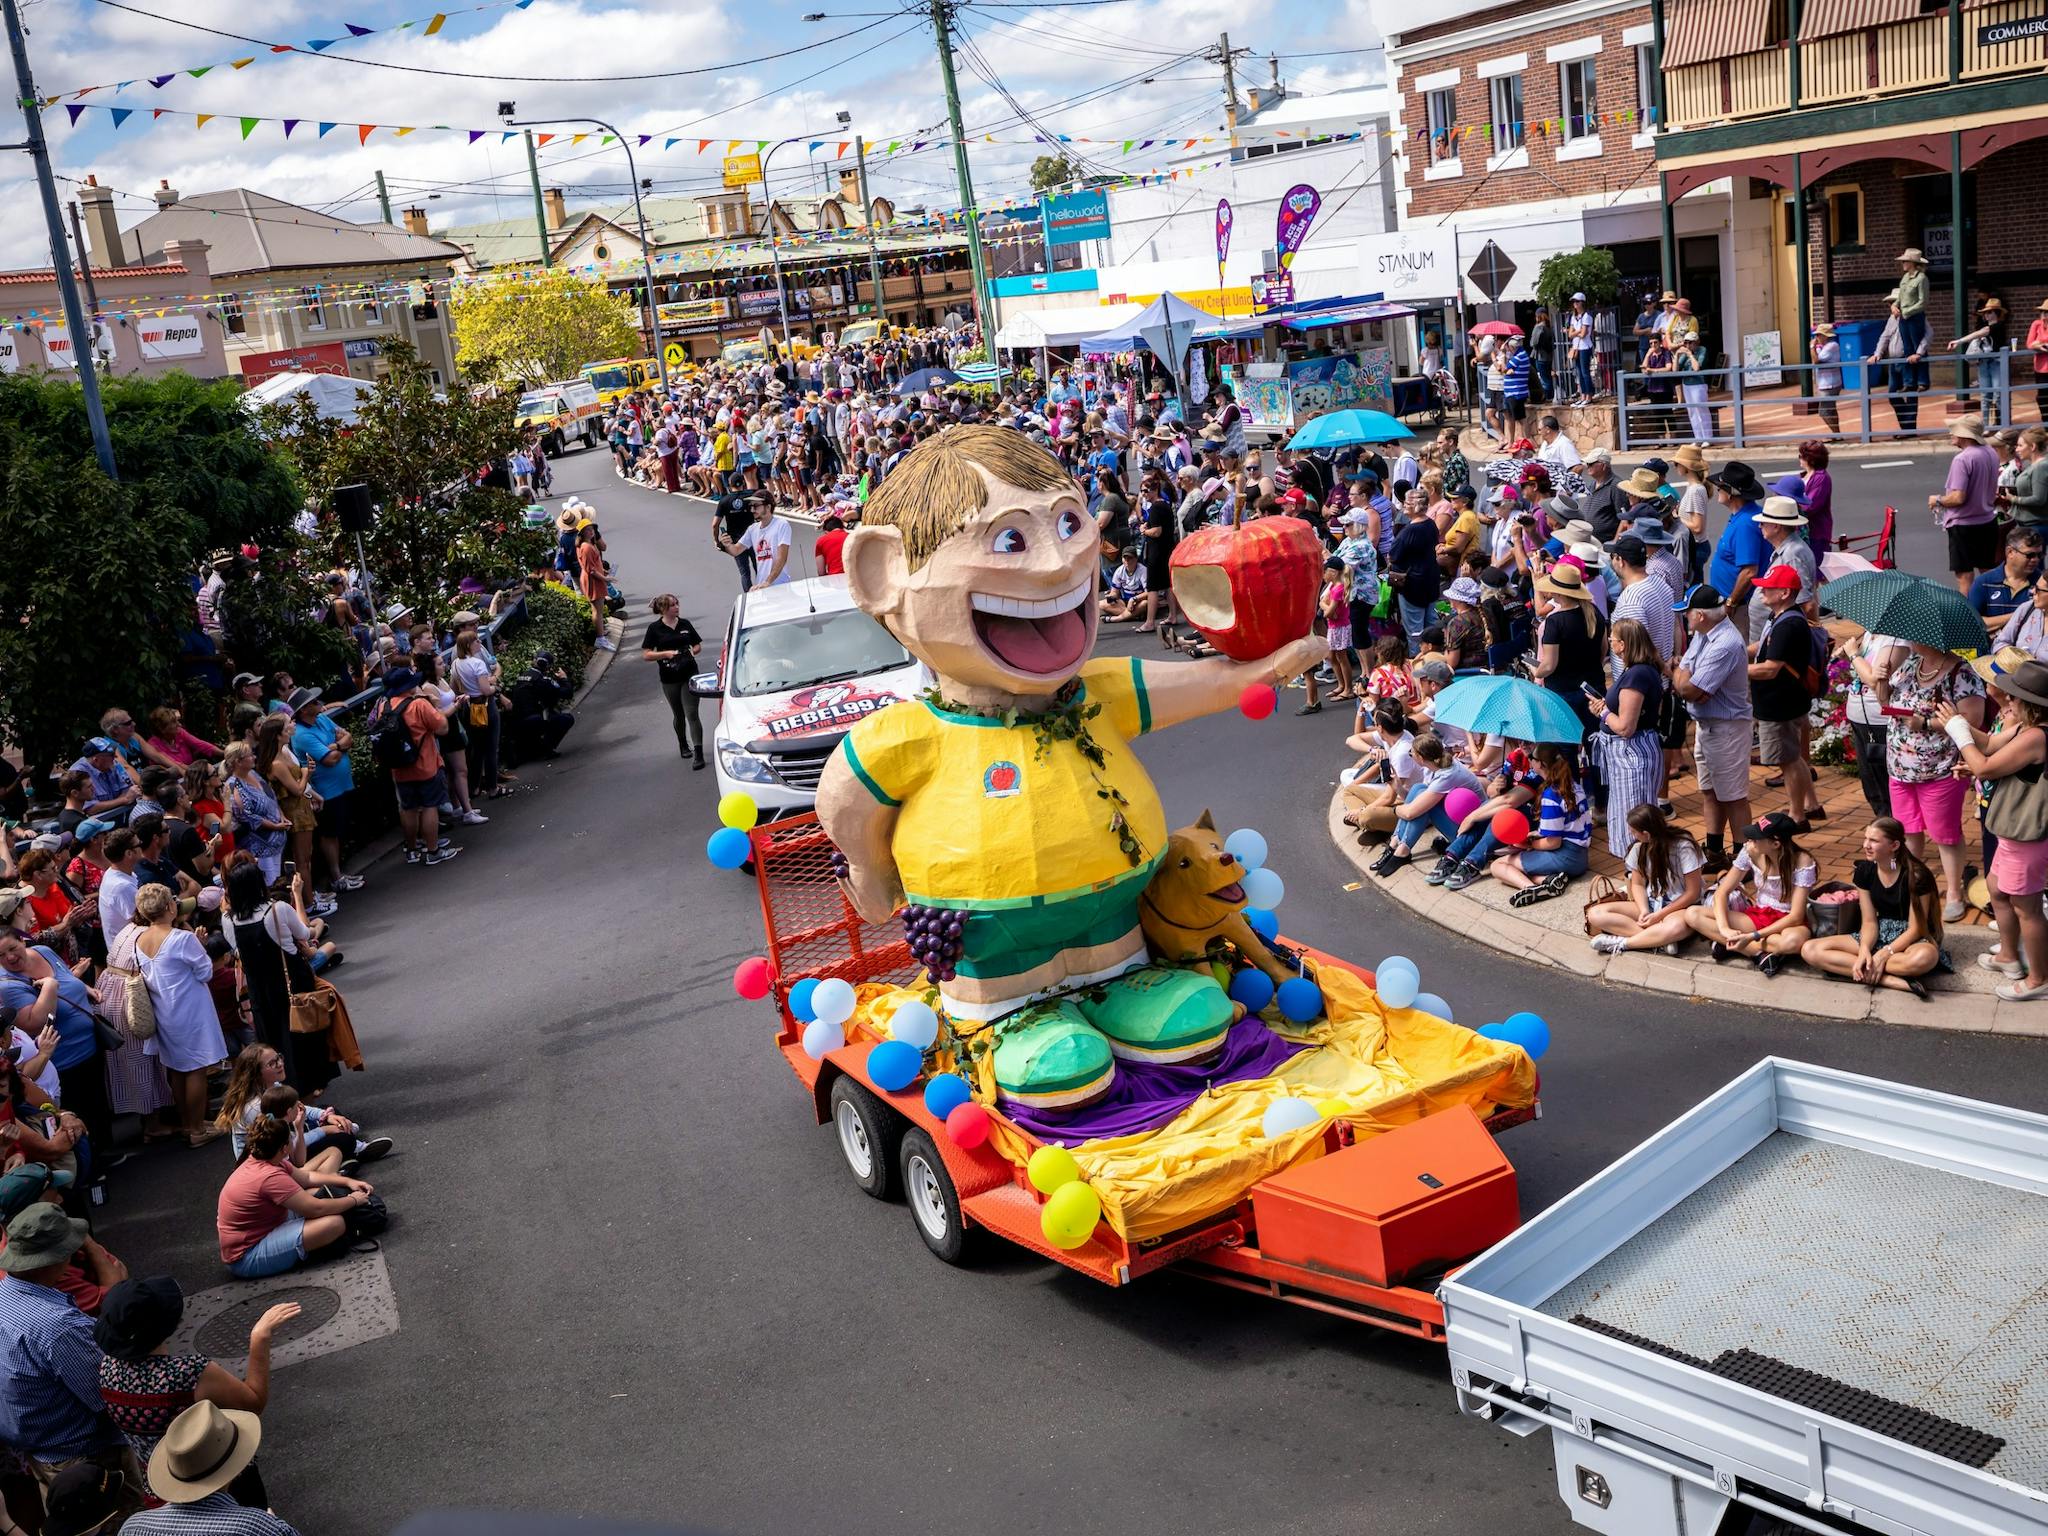 Grand Parade at Stanthorpe Apple and Grape Harvest Festival